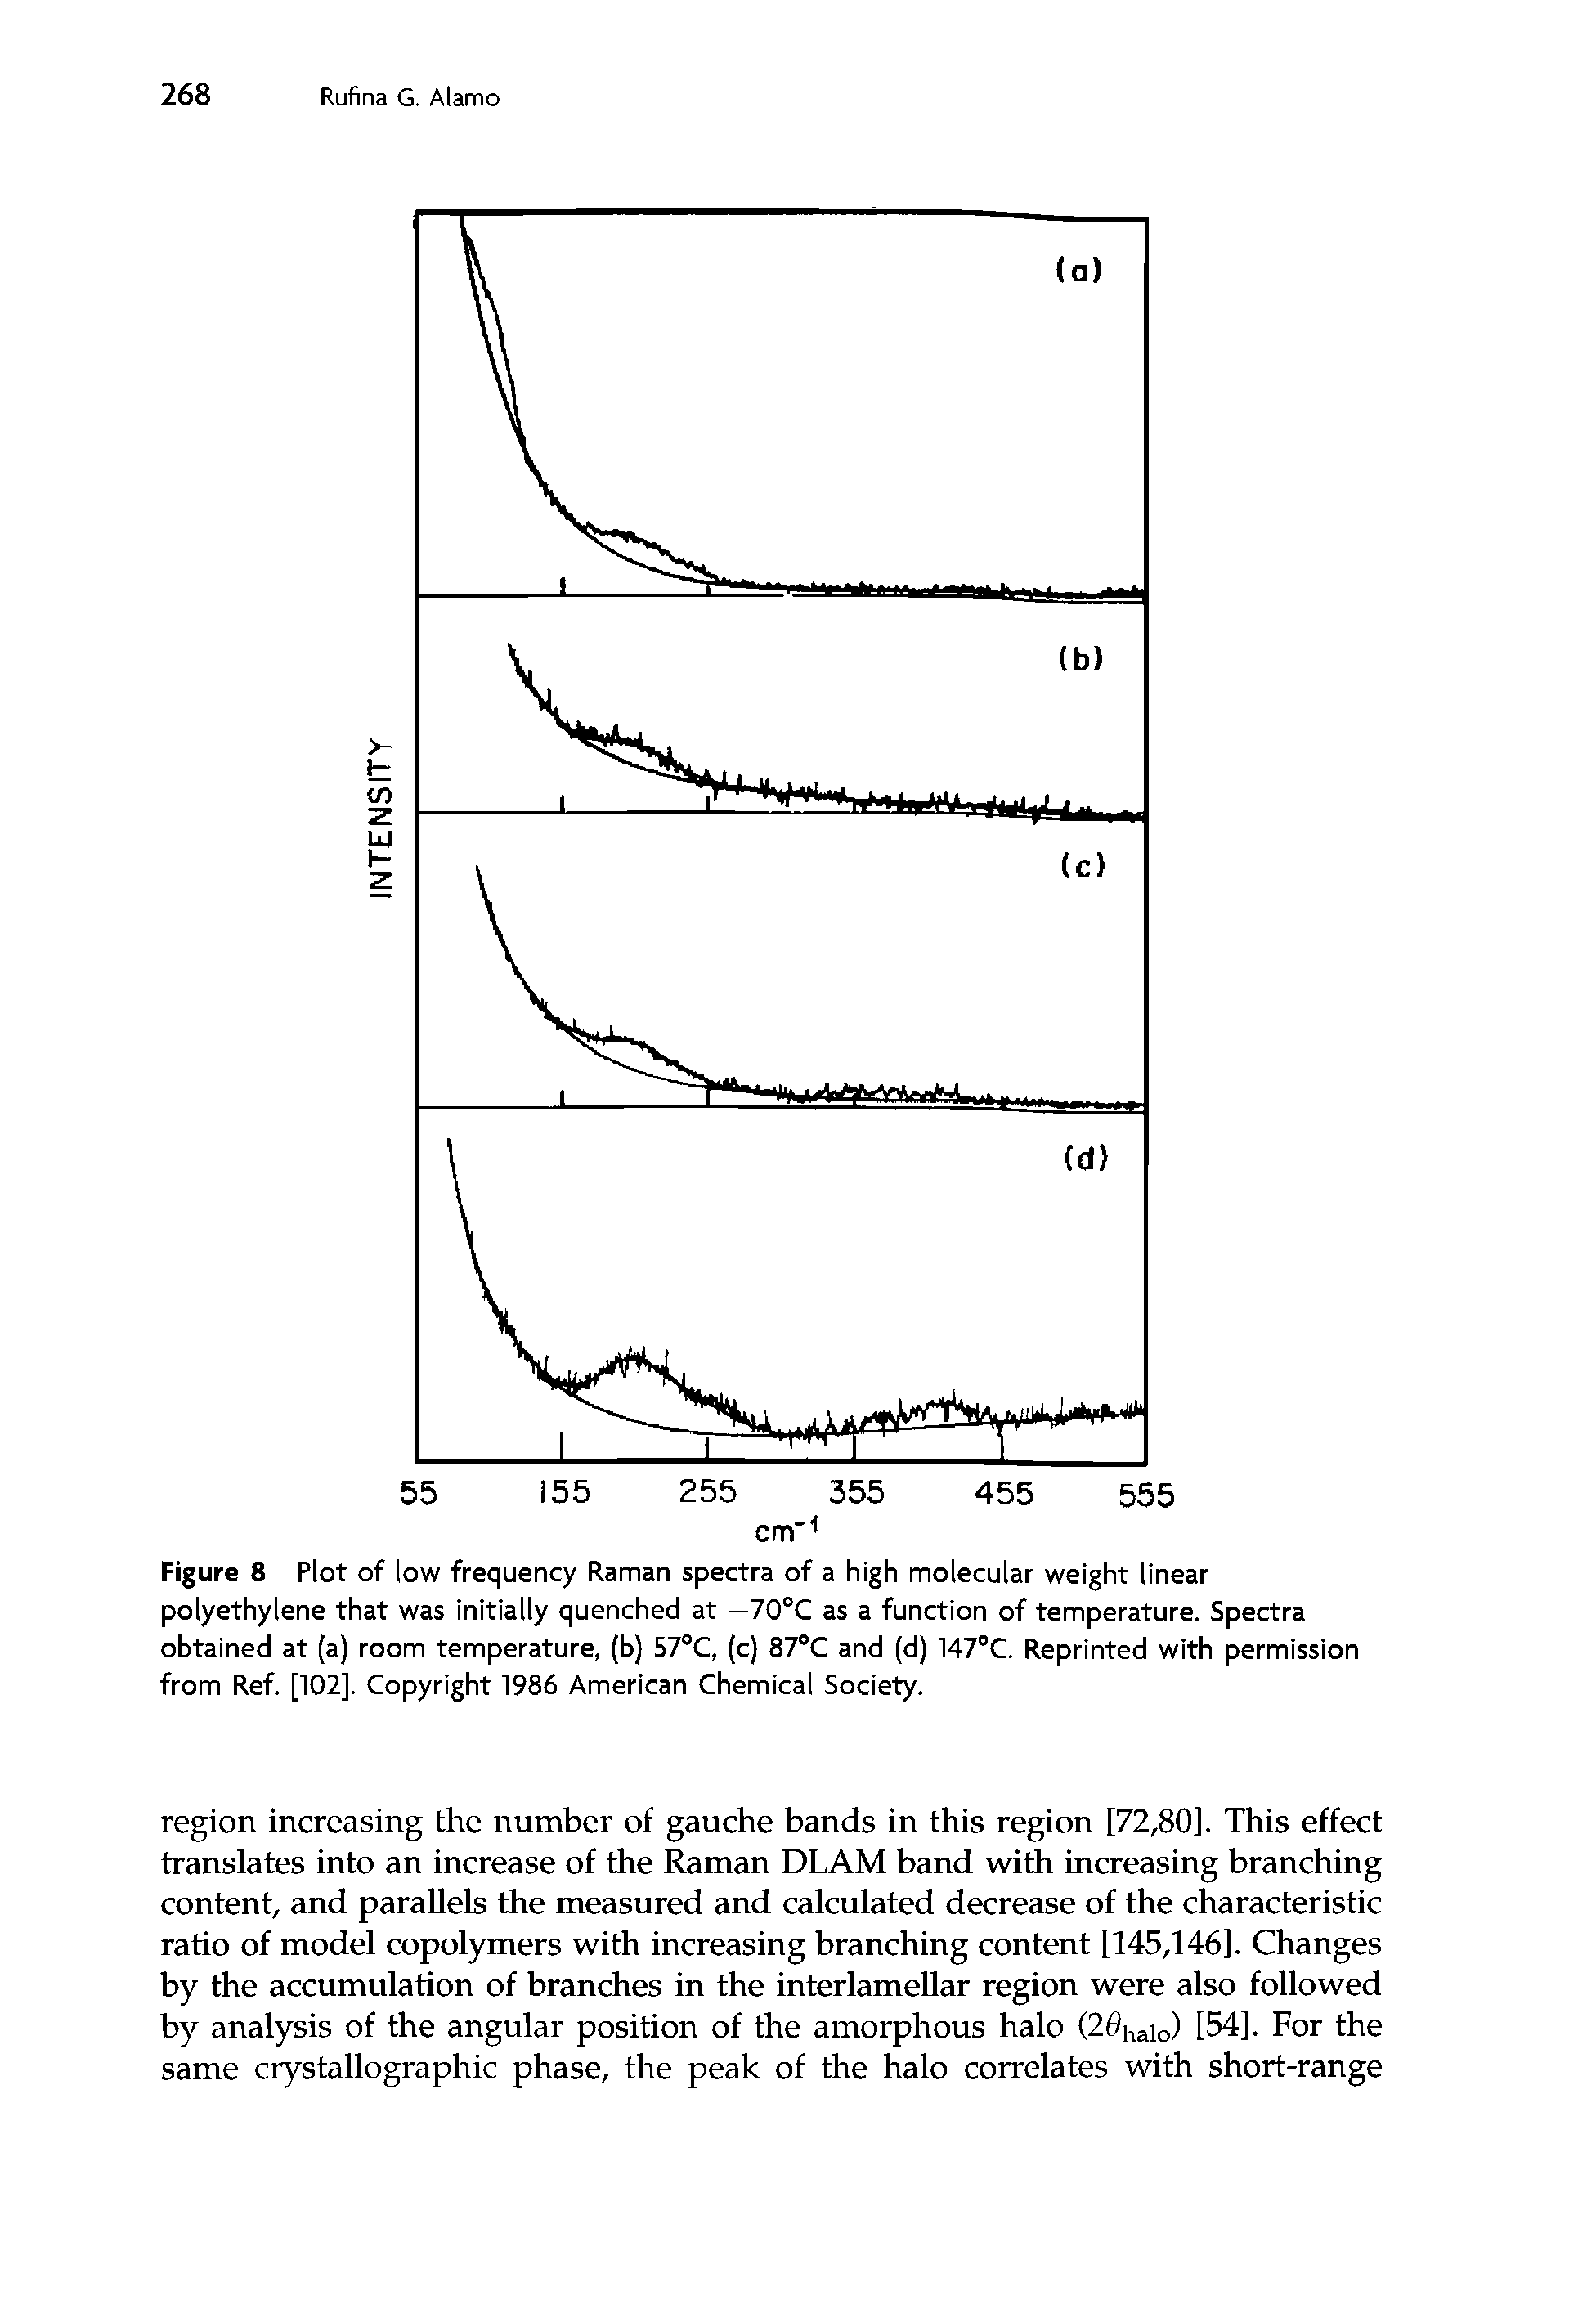 Figure 8 Plot of low frequency Raman spectra of a high molecular weight linear polyethylene that was initially quenched at —70°C as a function of temperature. Spectra obtained at (a) room temperature, (b) 57°C, (c) 87°C and (d) 147°C. Reprinted with permission from Ref. [102]. Copyright 1986 American Chemical Society.